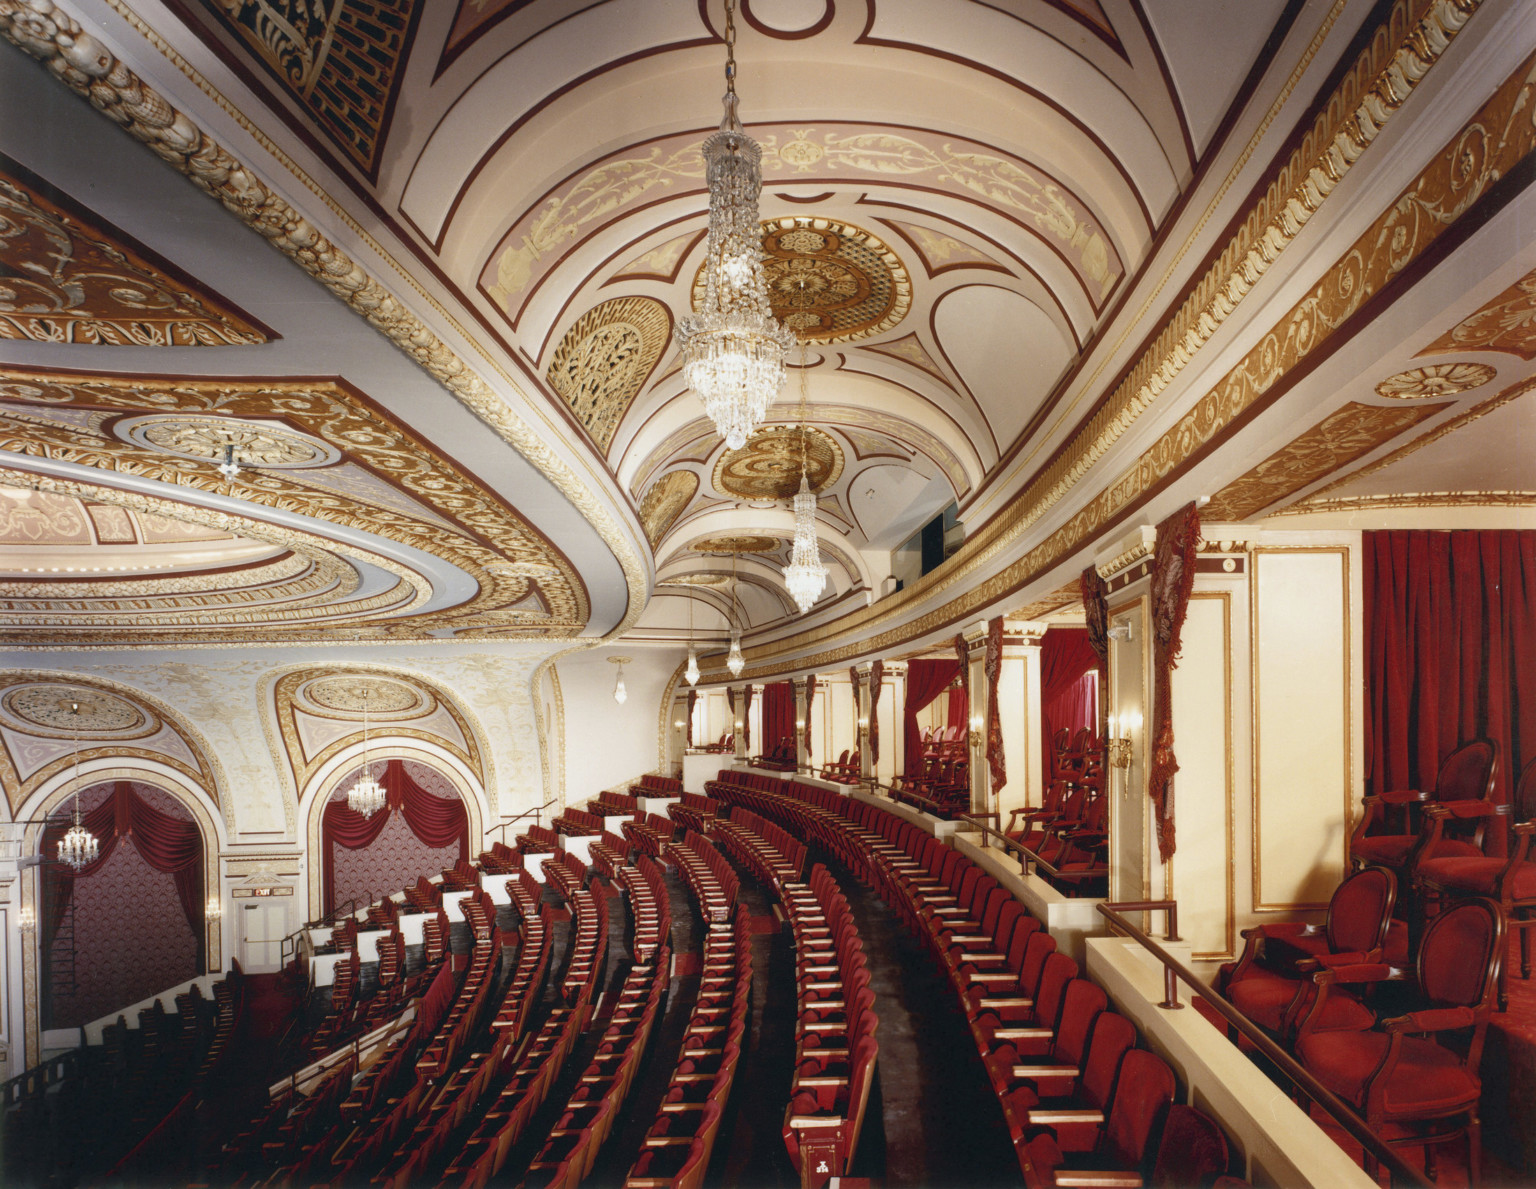 Box seats and back rows of audience in the Connor Palace Theater, with red seats and white walls with gold scroll details